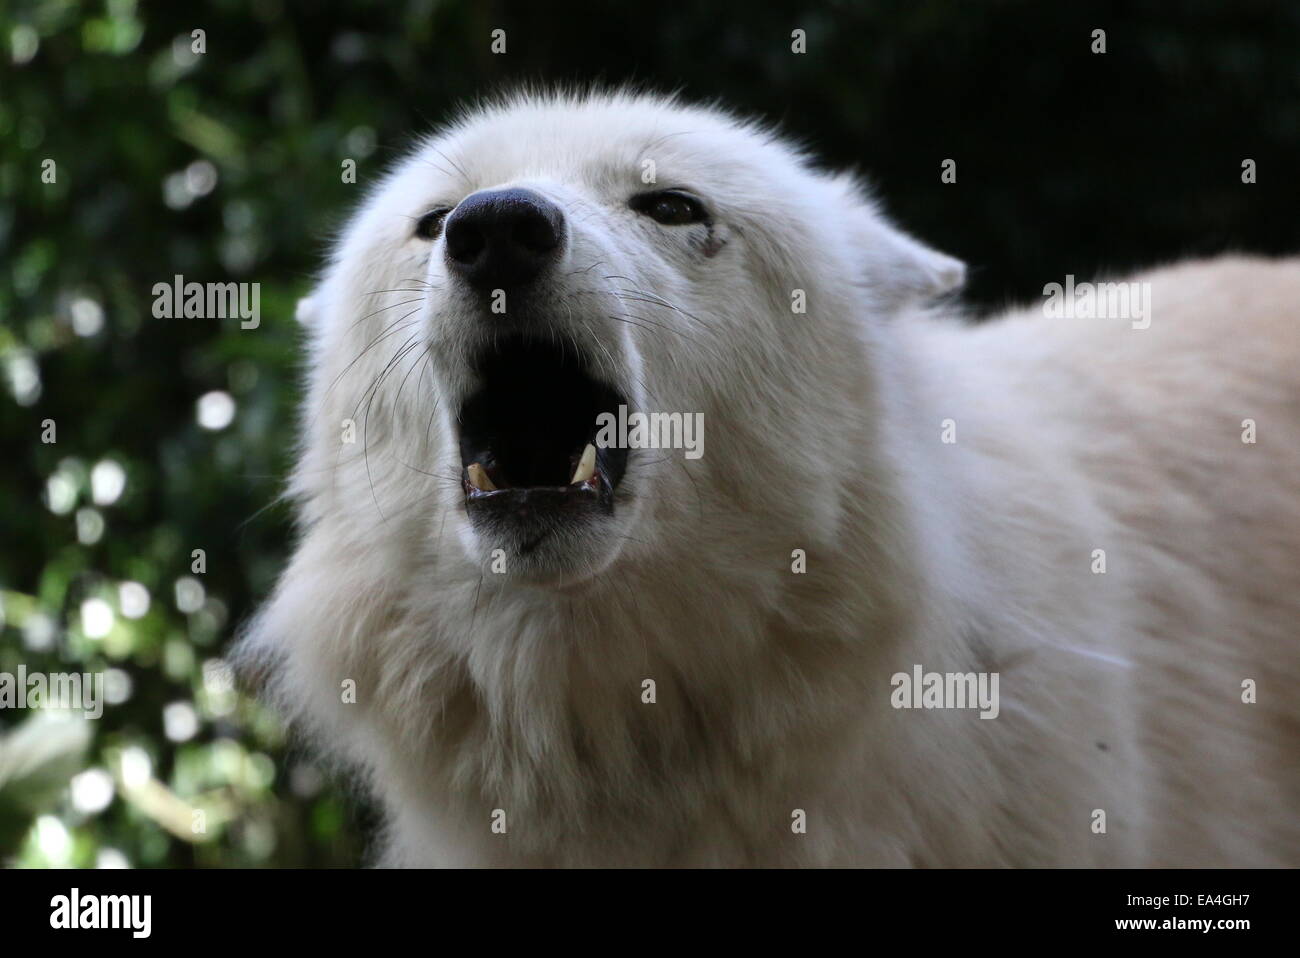 Howling arctic white wolf in close-up, facing camera Stock Photo - Alamy